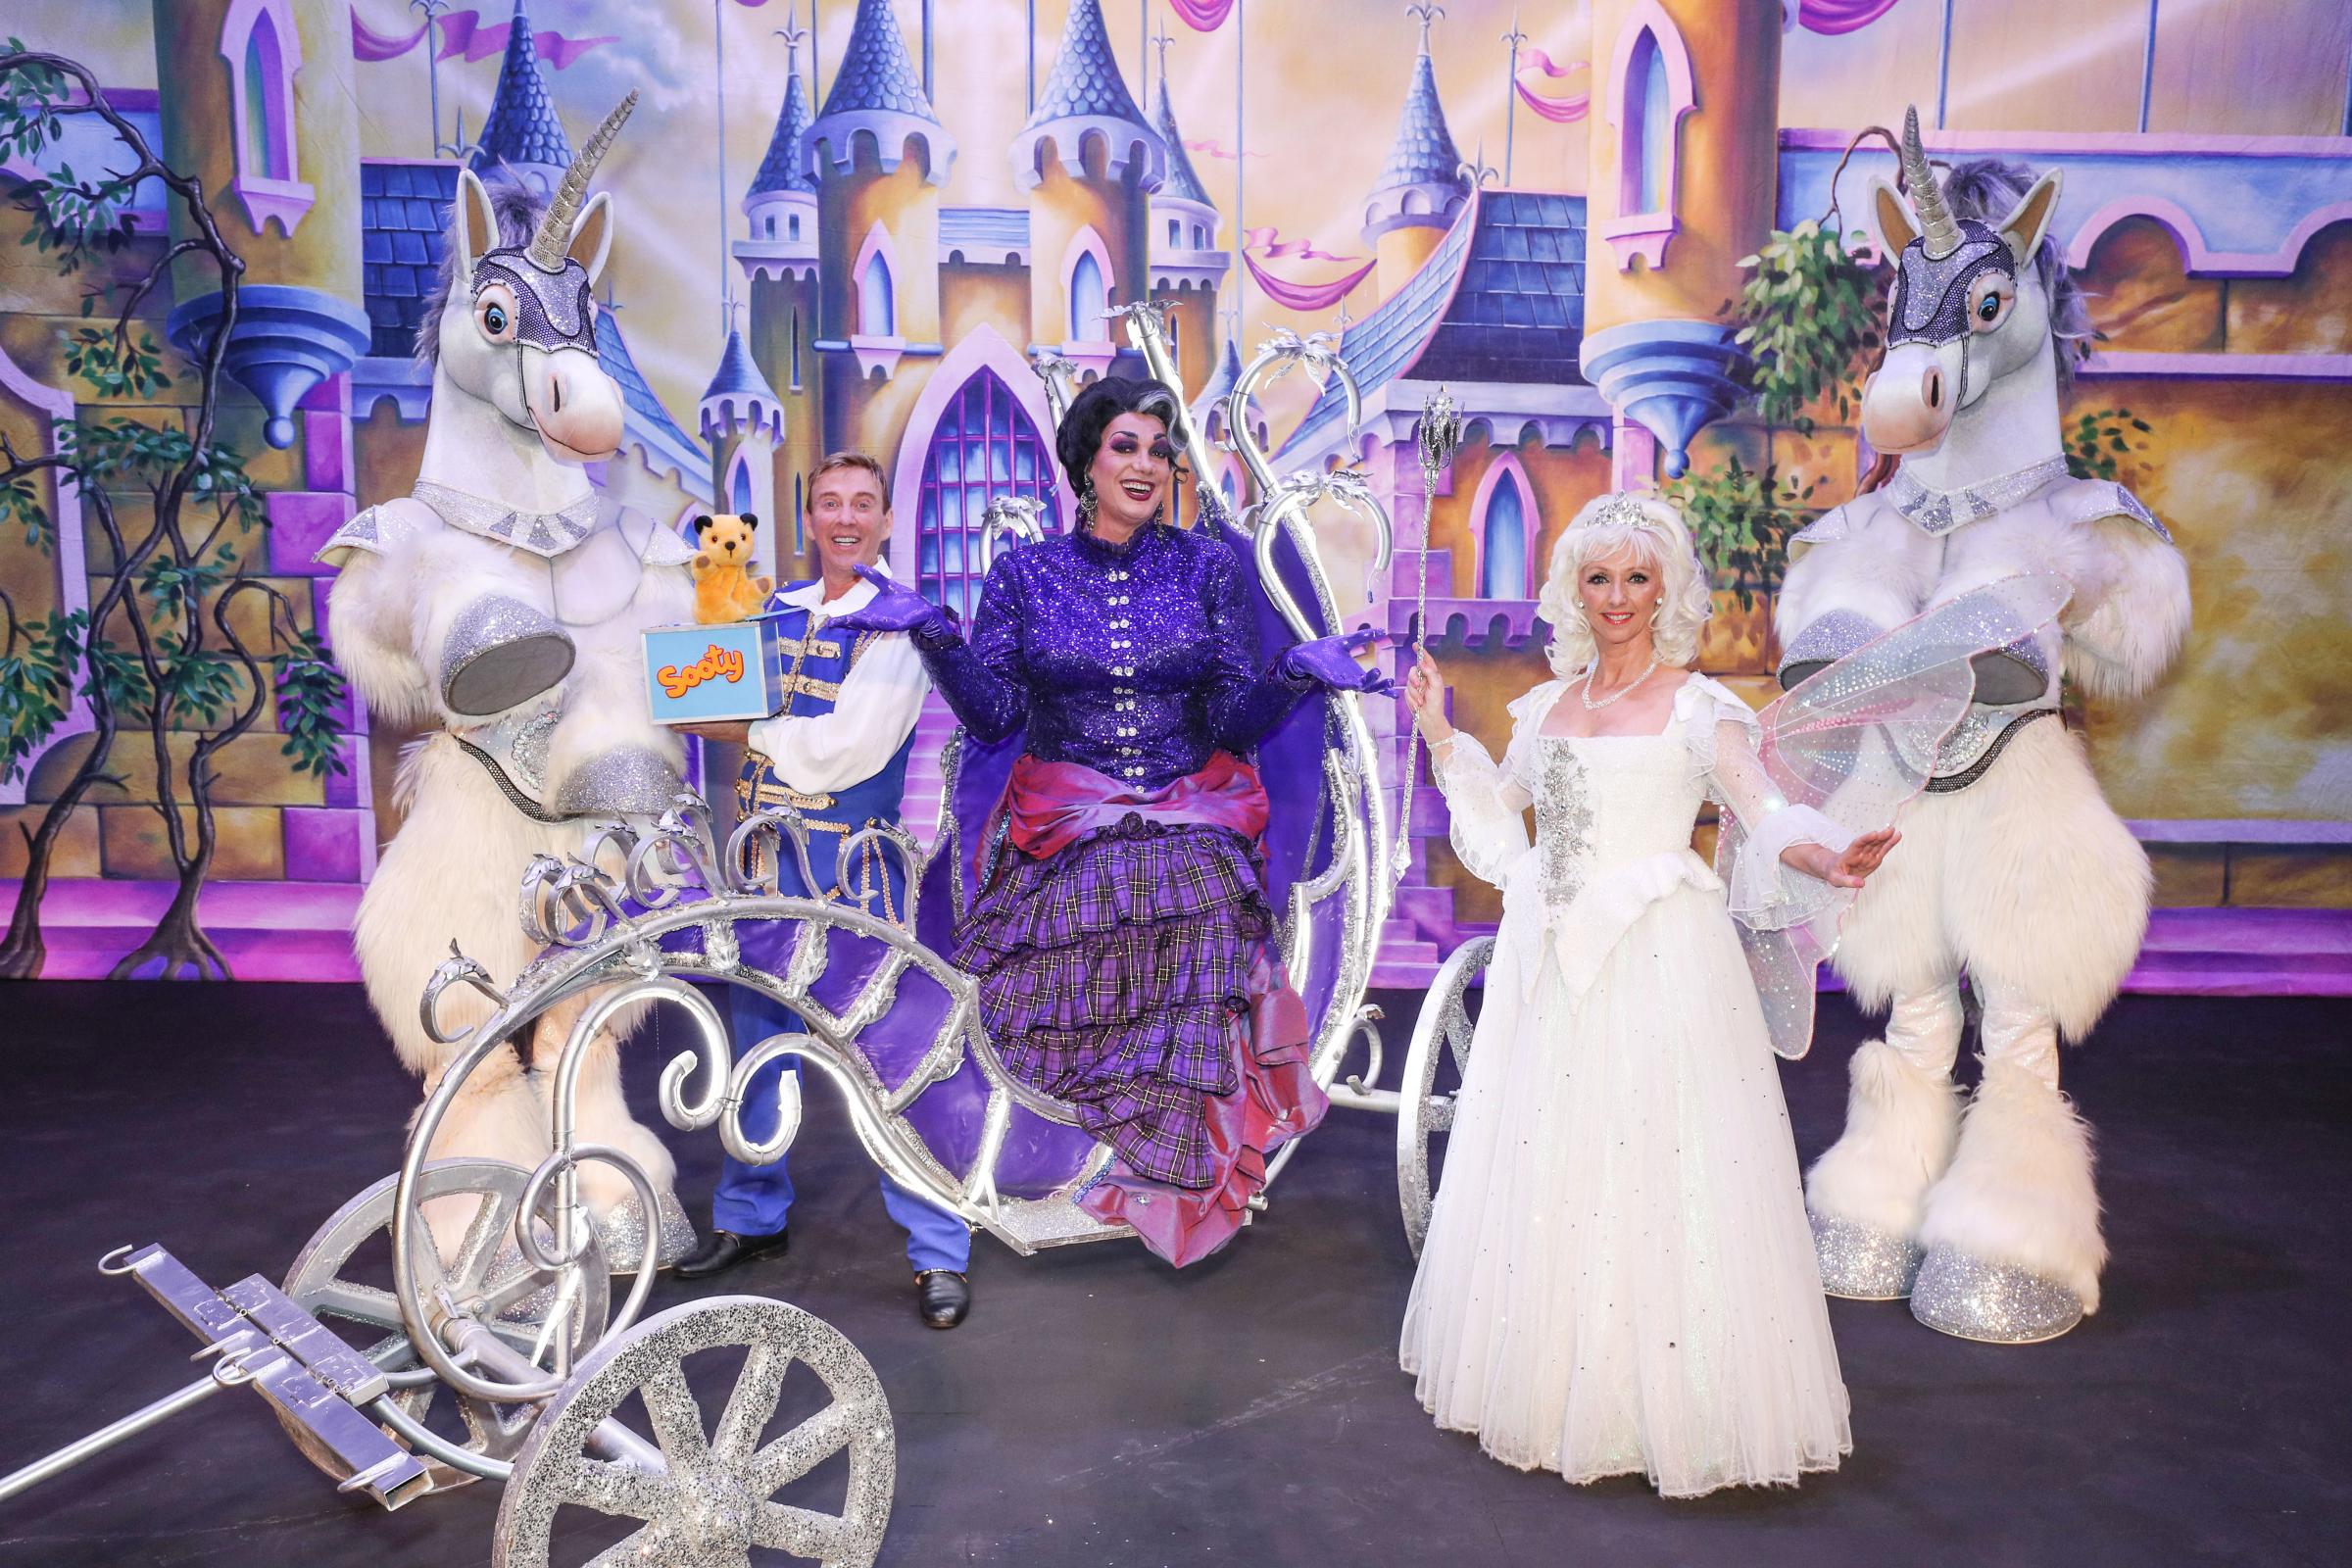 Cinderella Panto at The Mayflower Theatre, staring Craig Revel Horwood, Debbie McGee, Richard Cadell and Sooty.